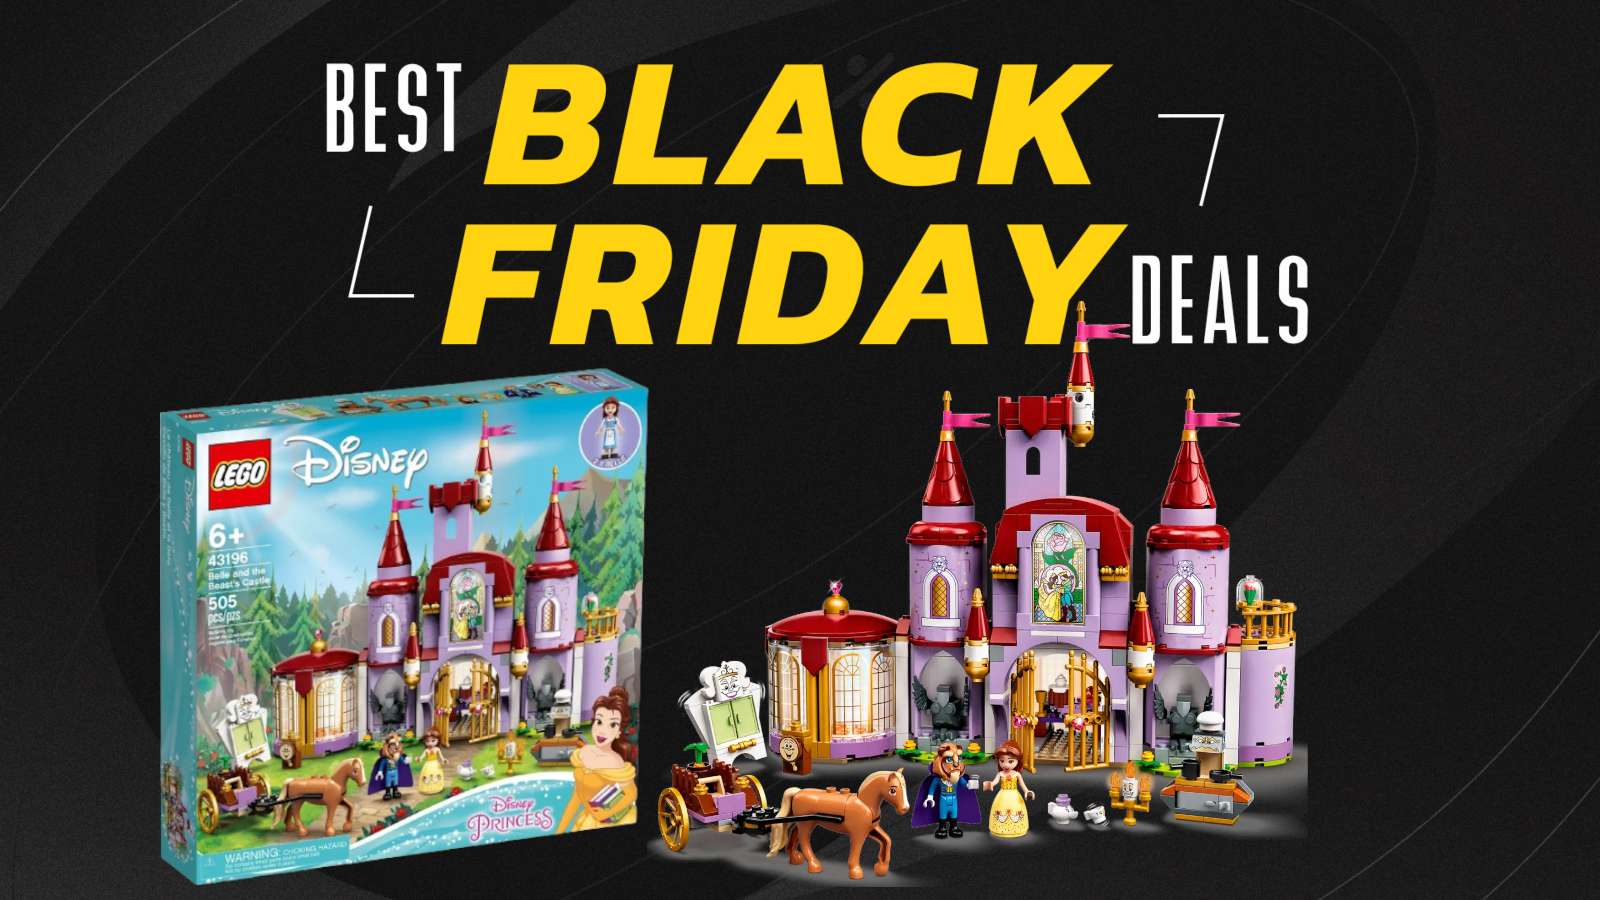 Black friday deals LEGO Disney Belle and Beasts Castle cover image